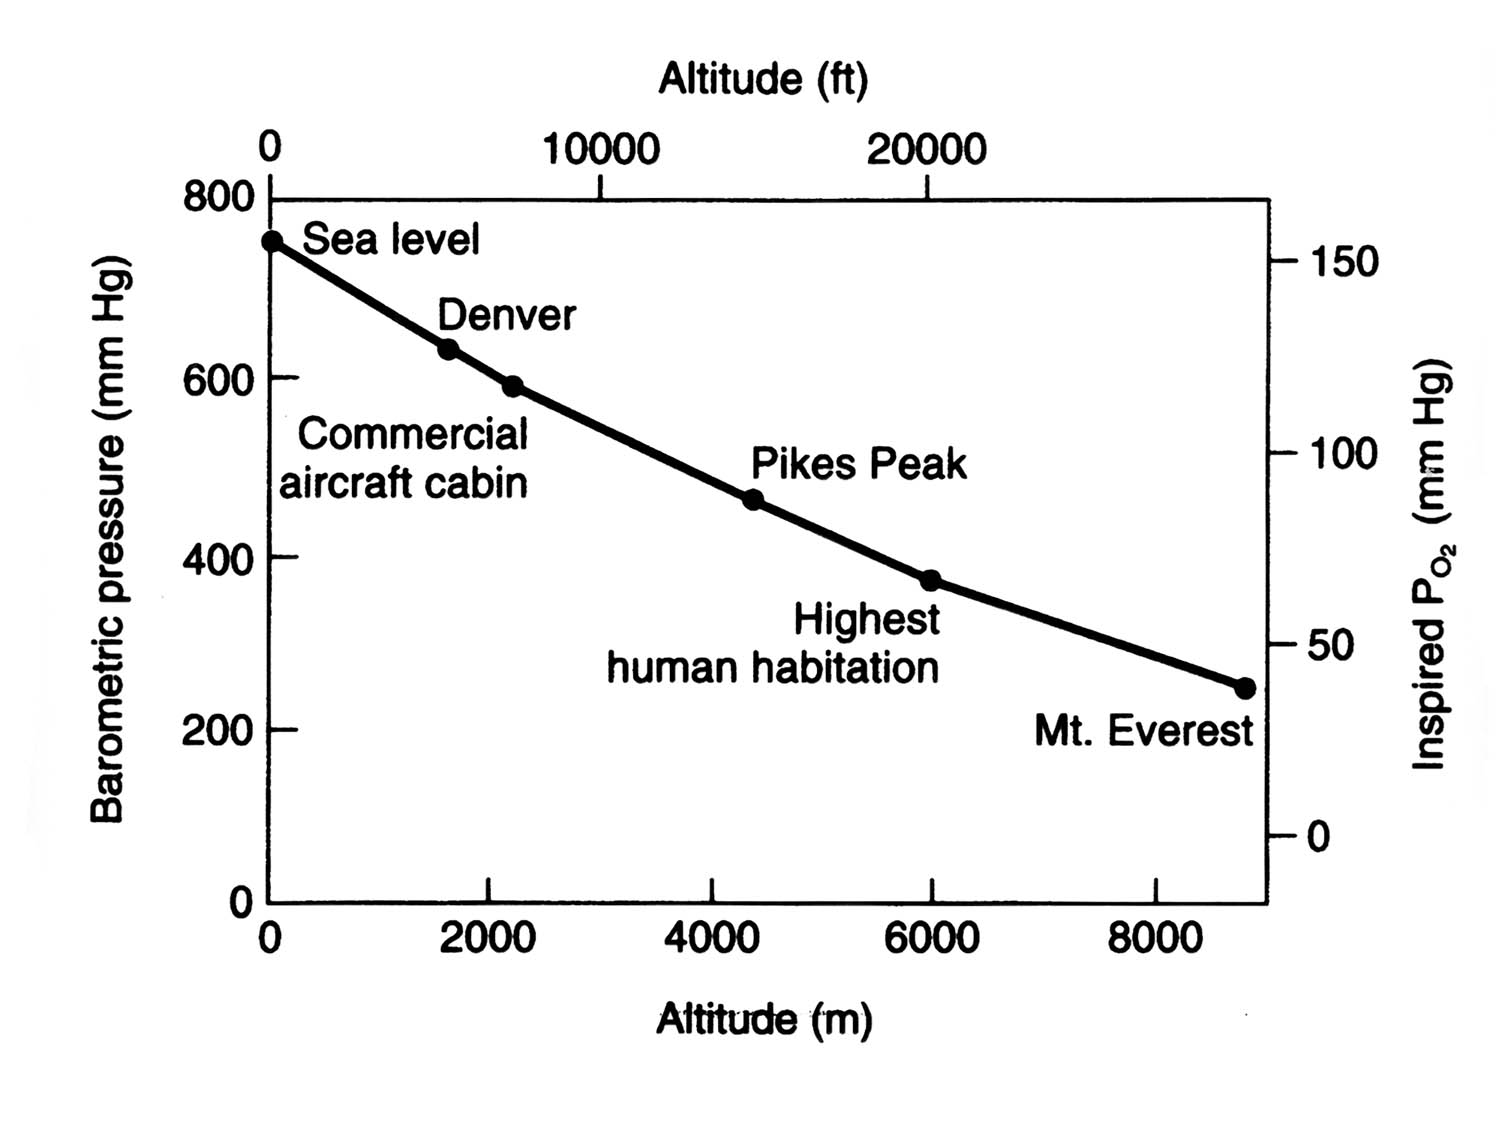 Does air pressure increase with altitude?